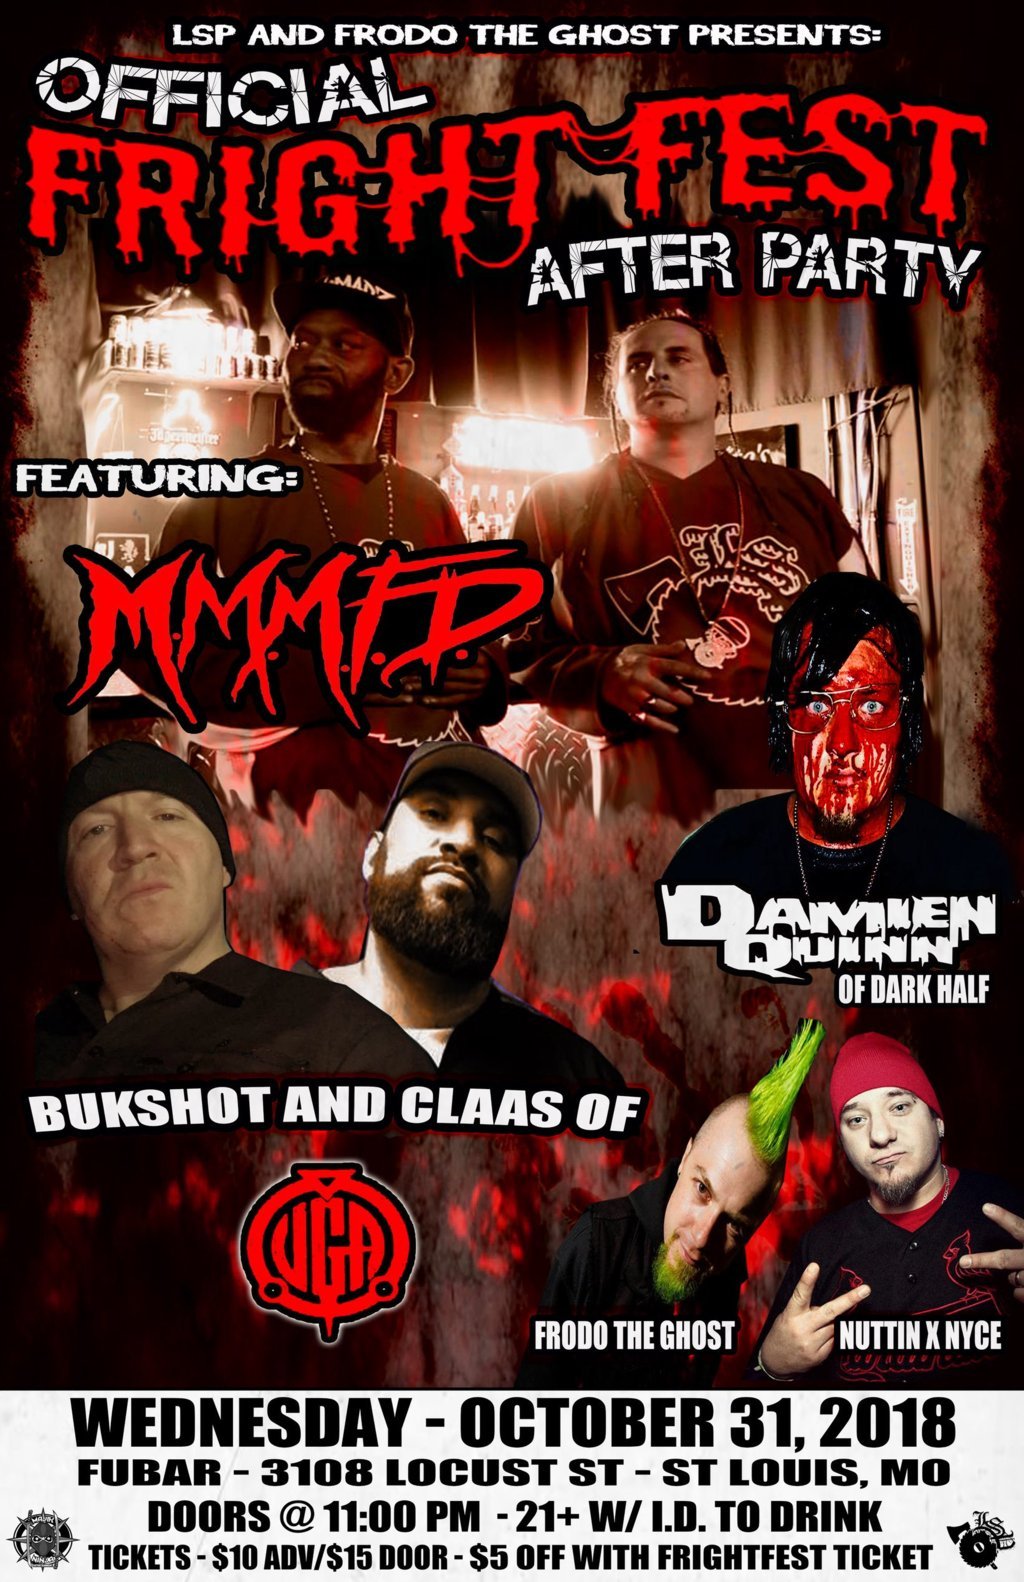 Official Fright Fest After Party (ft. MMMFD, Bukshot, CLAAS, more!) – St. Louis, MO | Faygoluvers